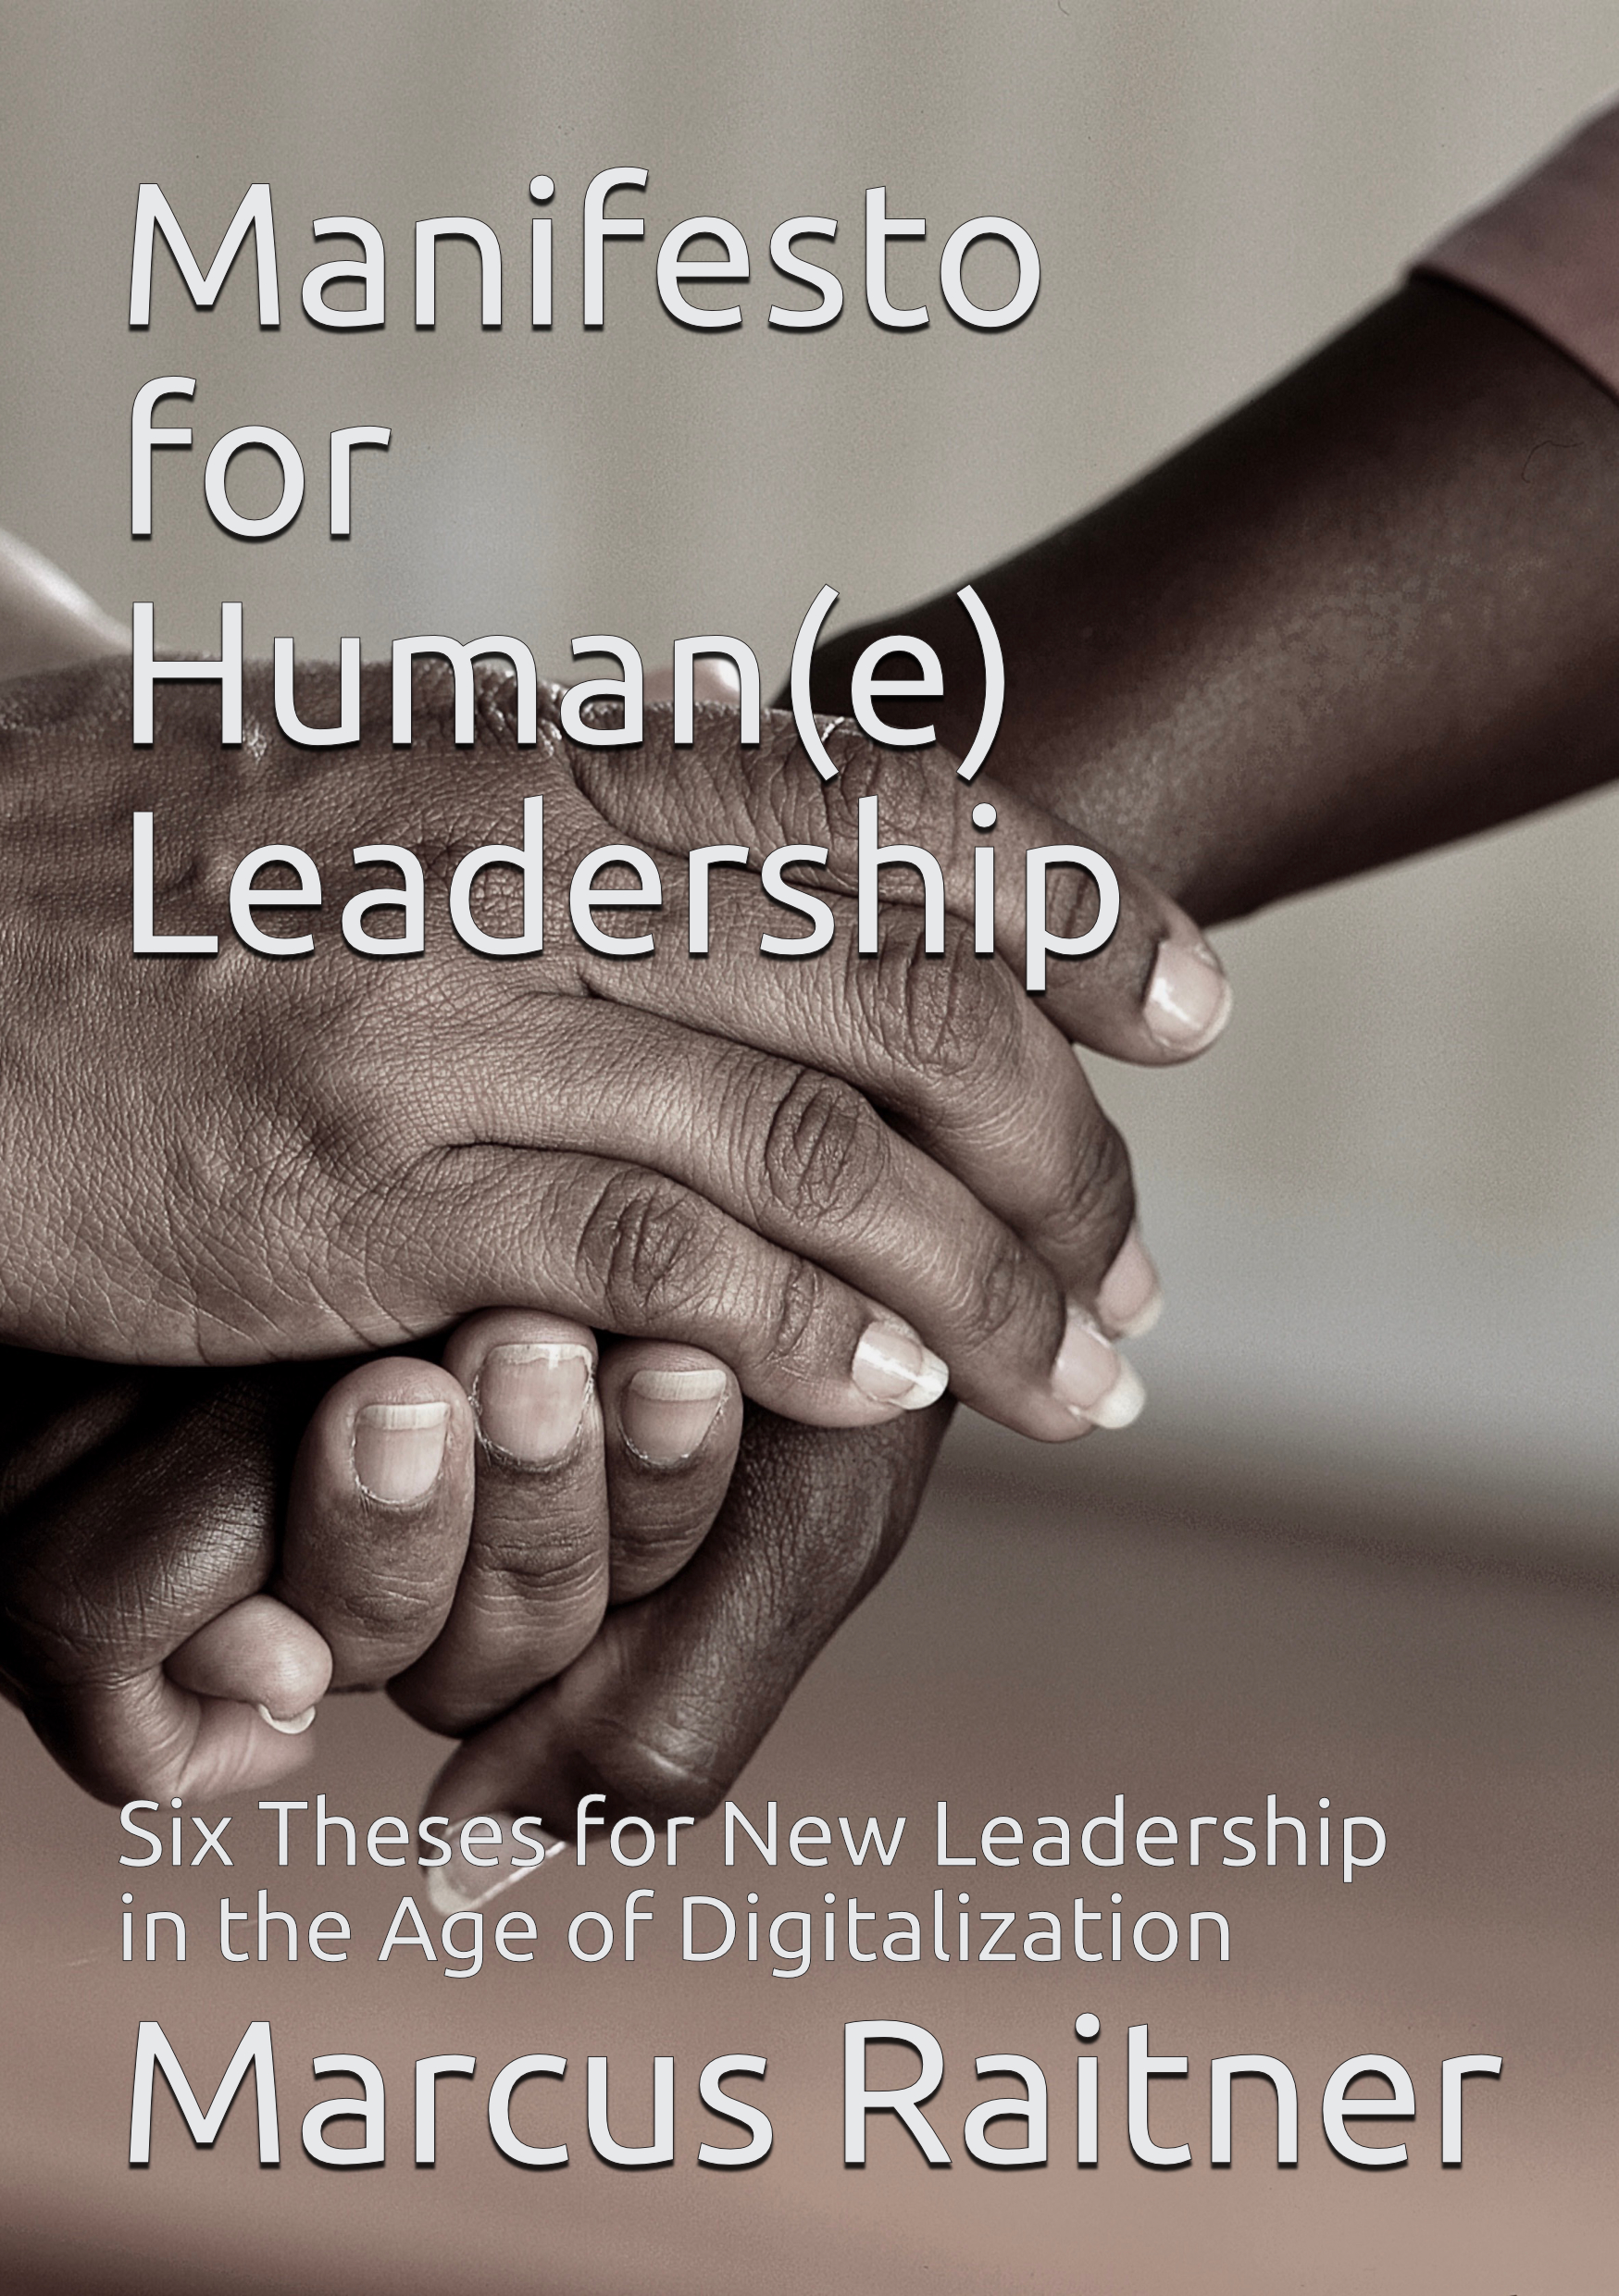 The English edition of the Manifesto for Human(e) Leadership; available as  paperback and e-book from Amazon.